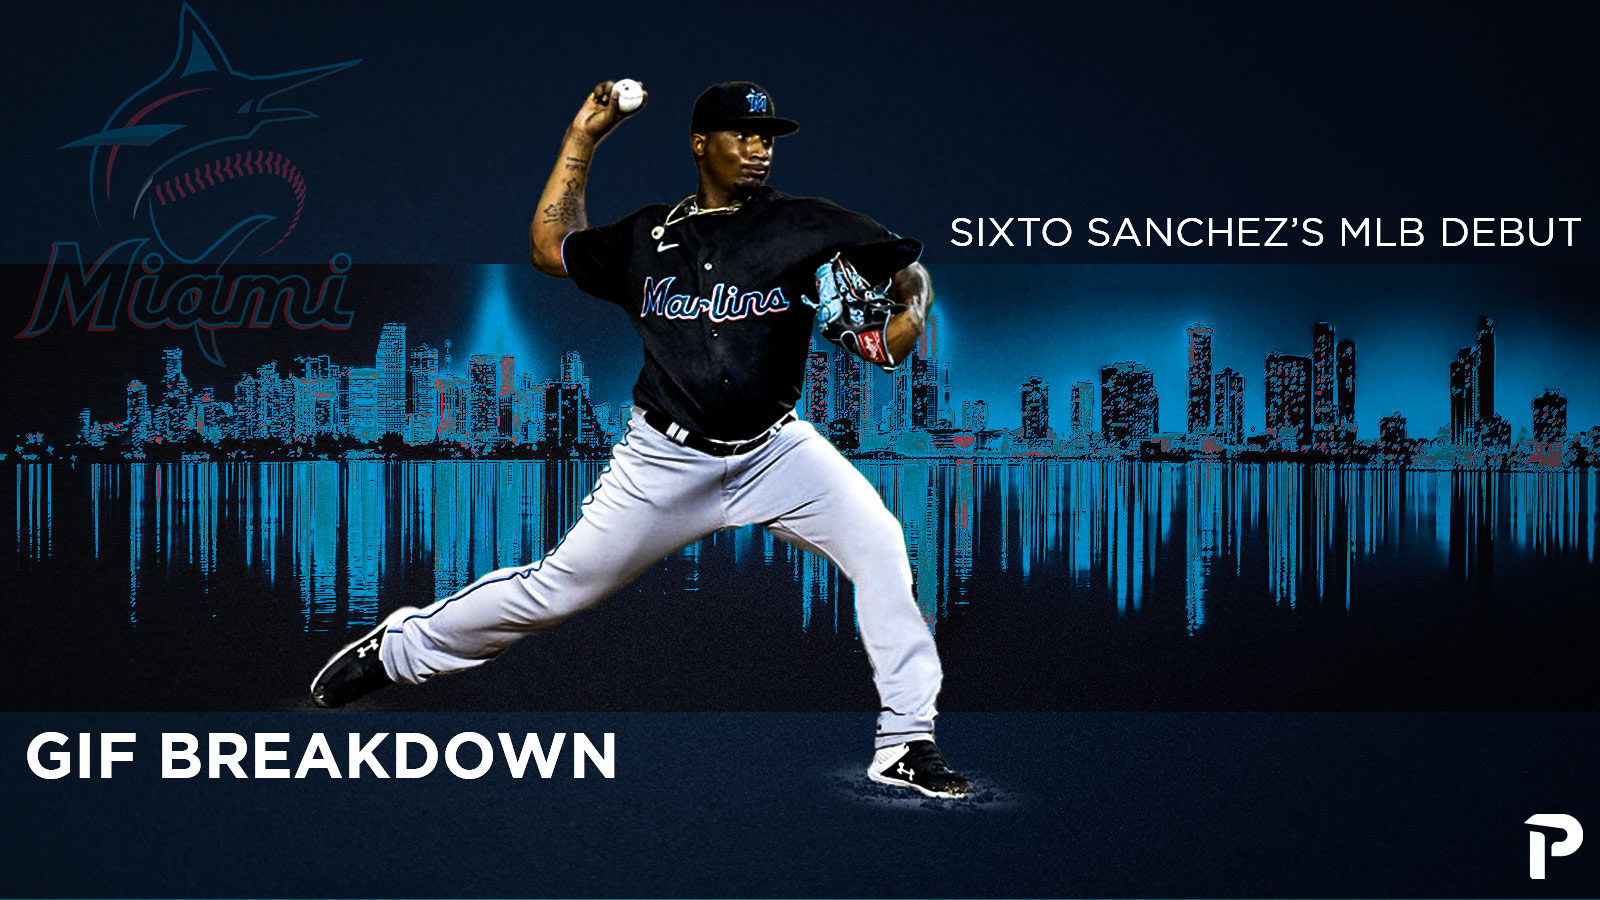 Azout] Sixto Sanchez's fastball is sitting at 85 right now. : r